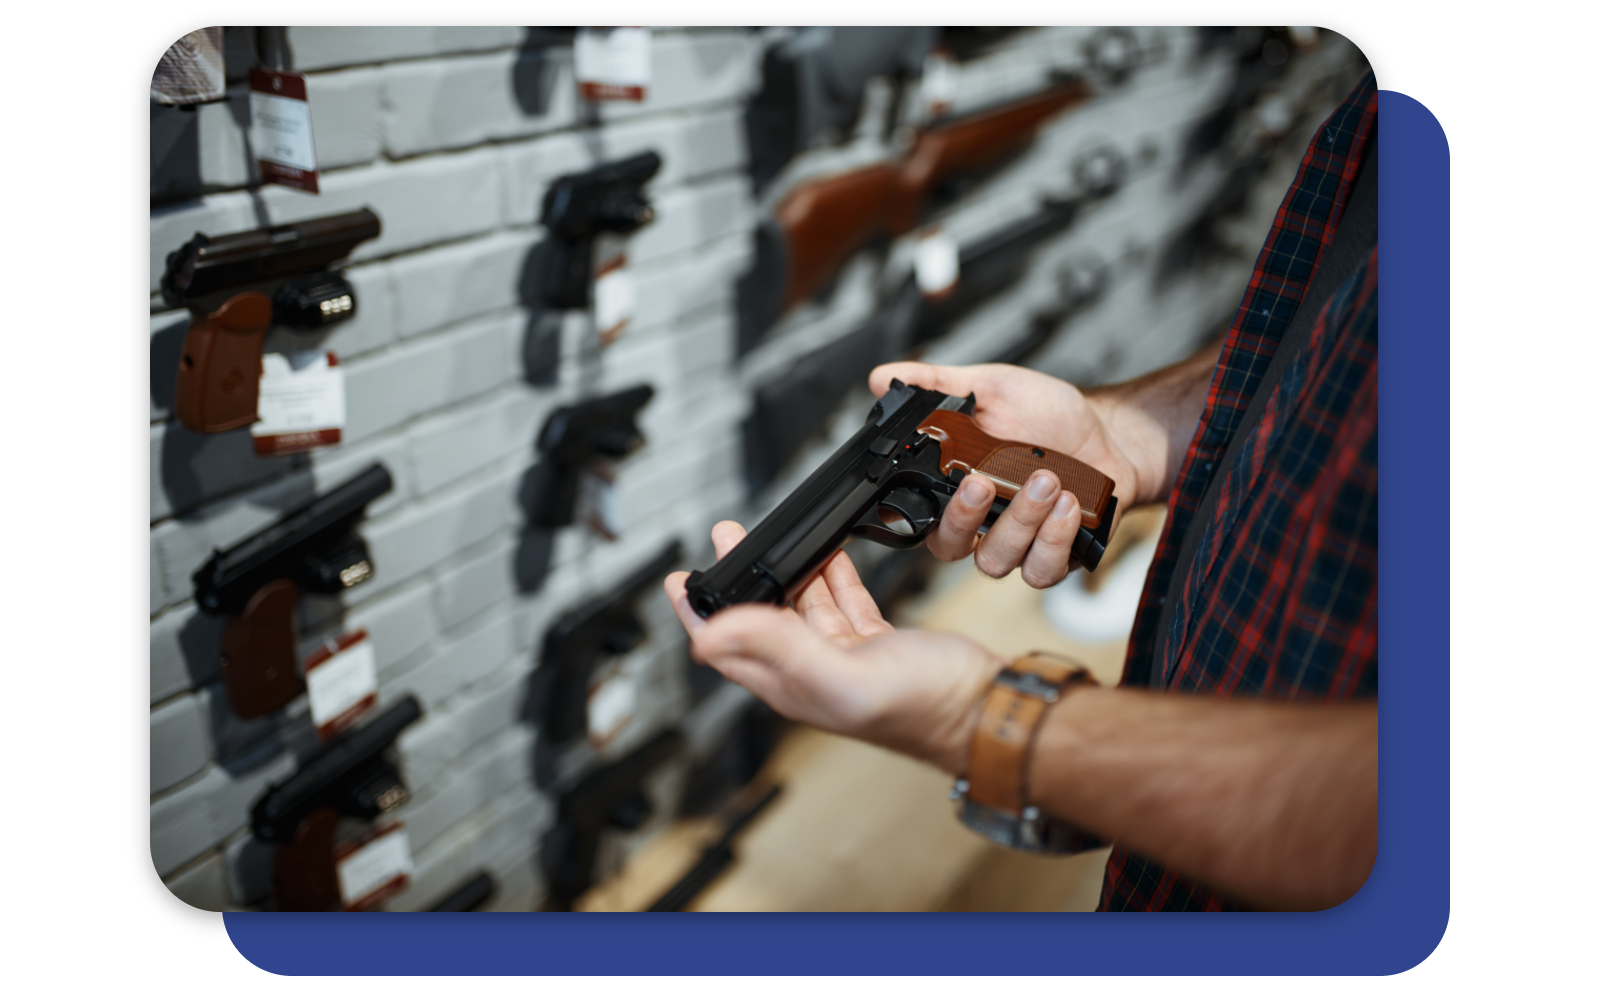 With the growth of the firearms industry comes the need for online marketing services.